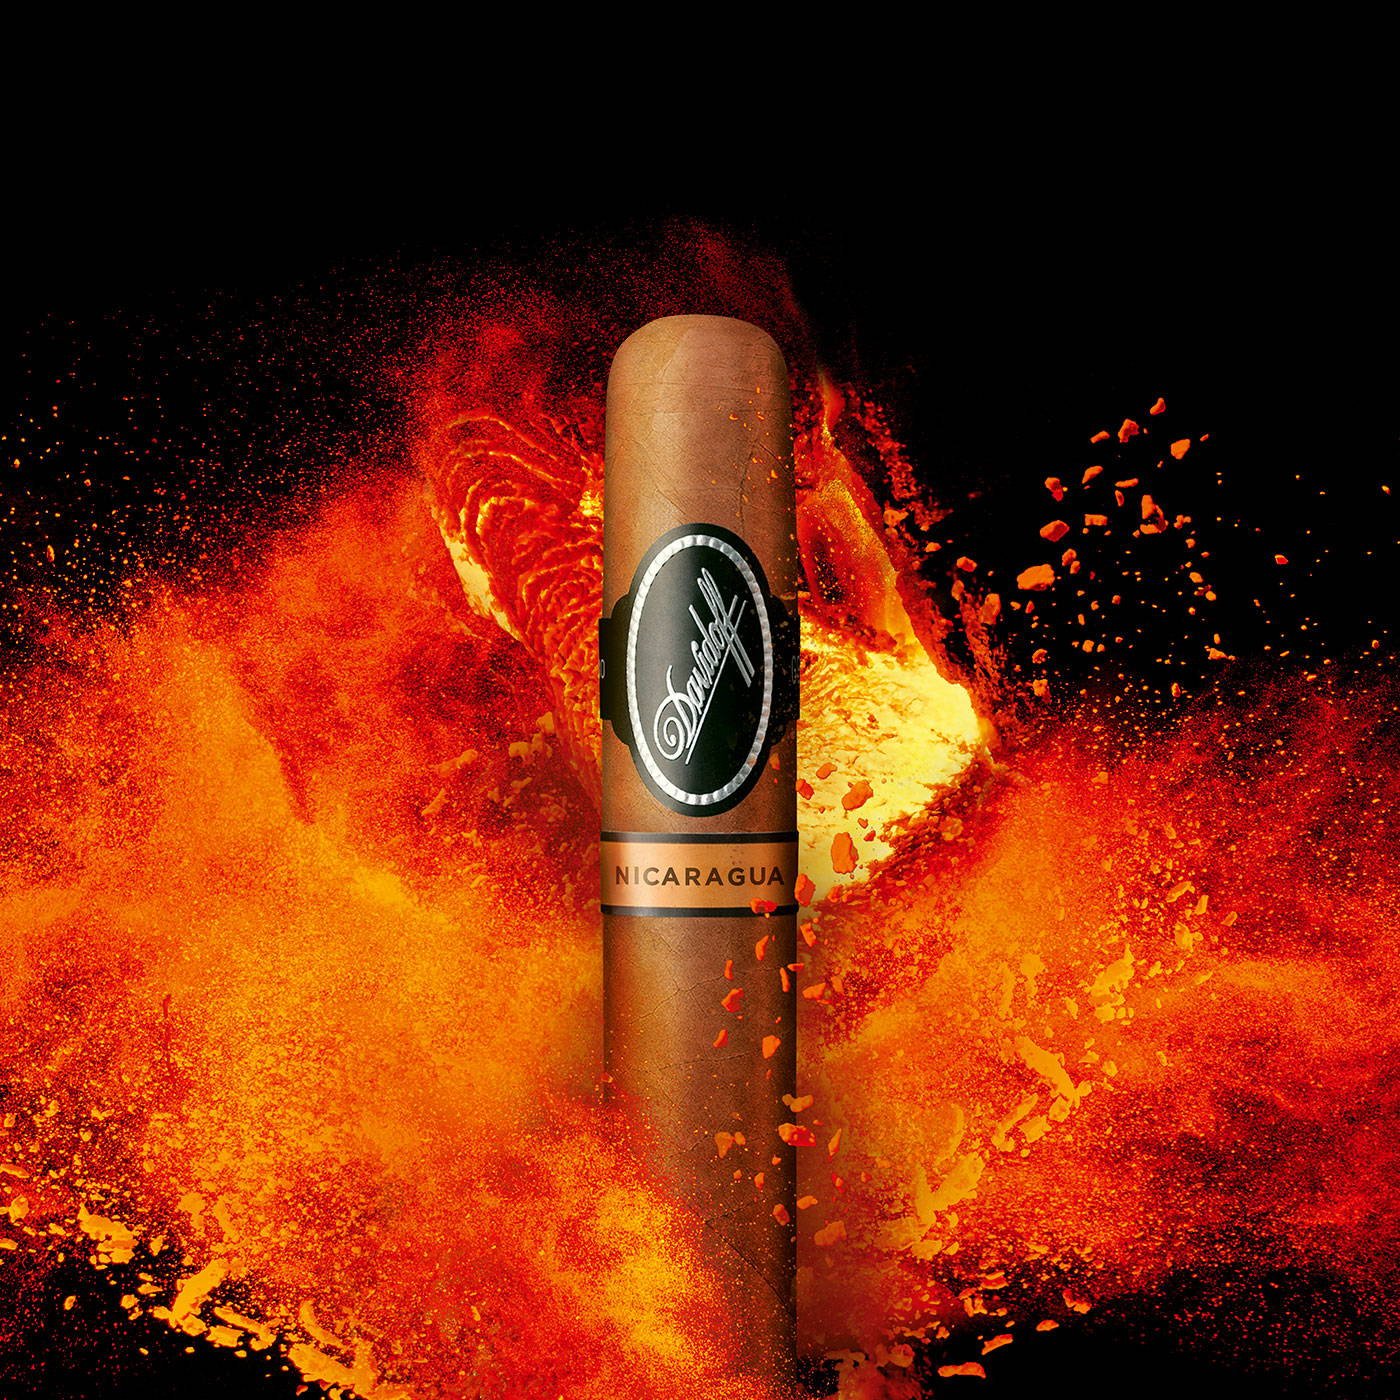 A Davidoff Nicaragua cigar standing in front of a powerful bright orange fire